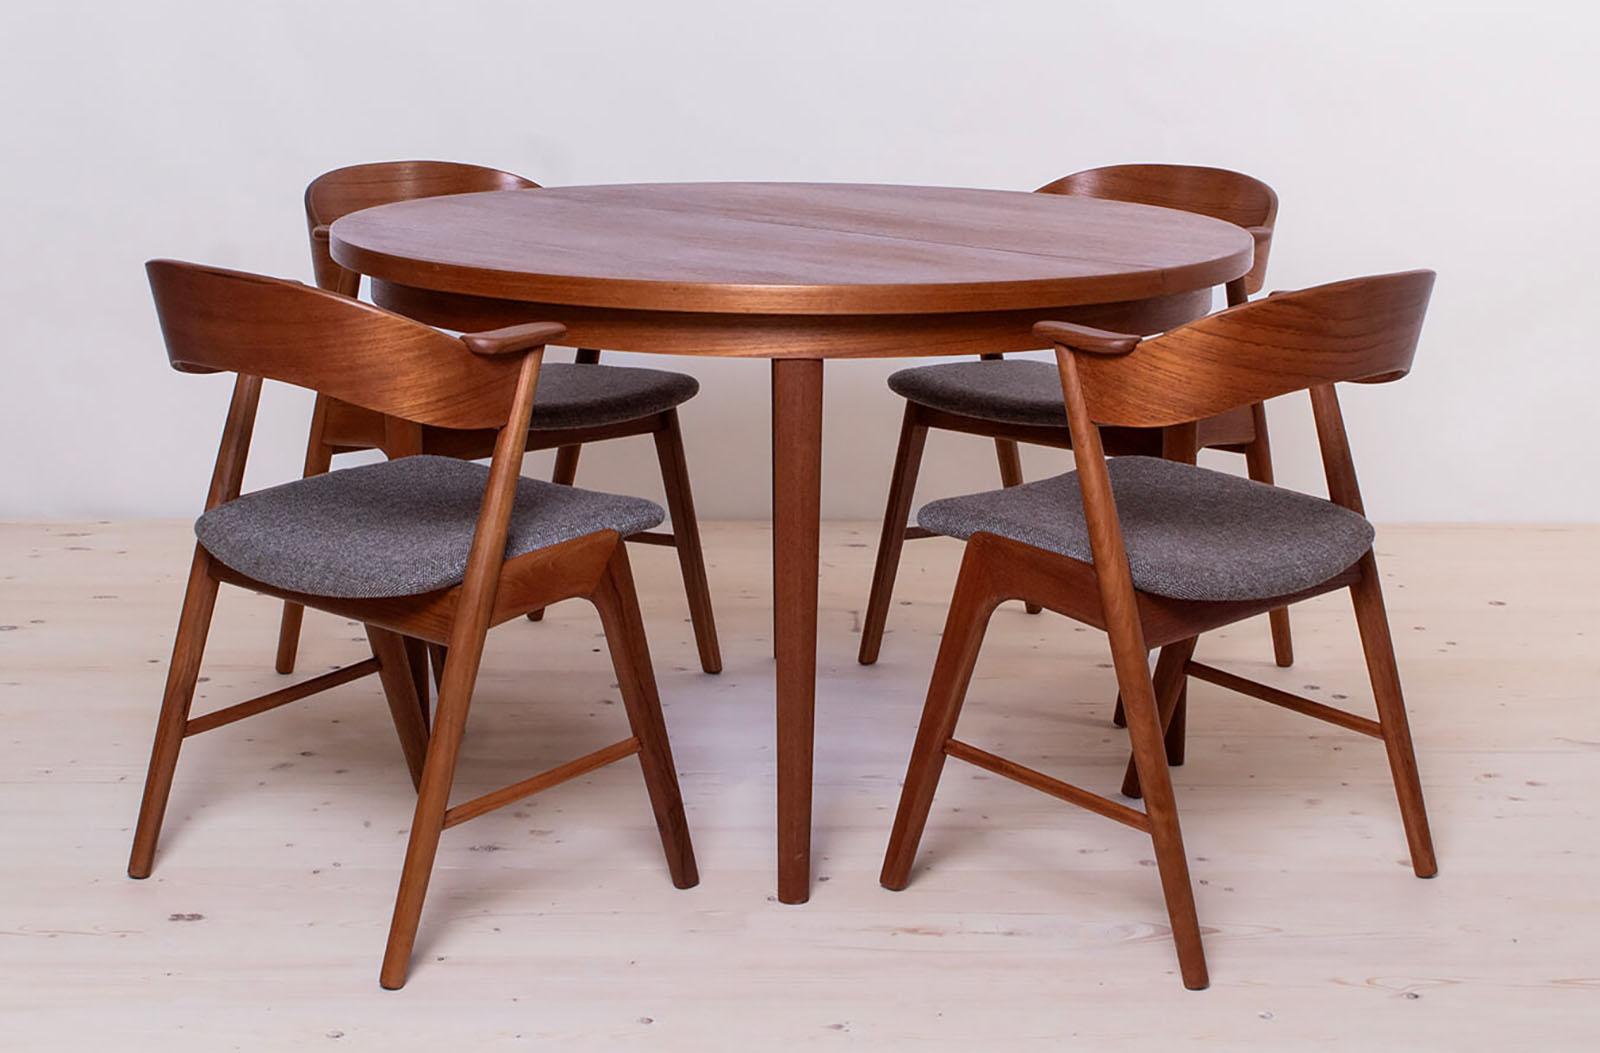 Absolutely rare find! This full dining set consists of 8 chairs and 1 extendable table. The set was produced around 1960s by KORUP Stolefabrik. Designed in the manner of Kai Kristinasen (also known as model 32), but there is no official